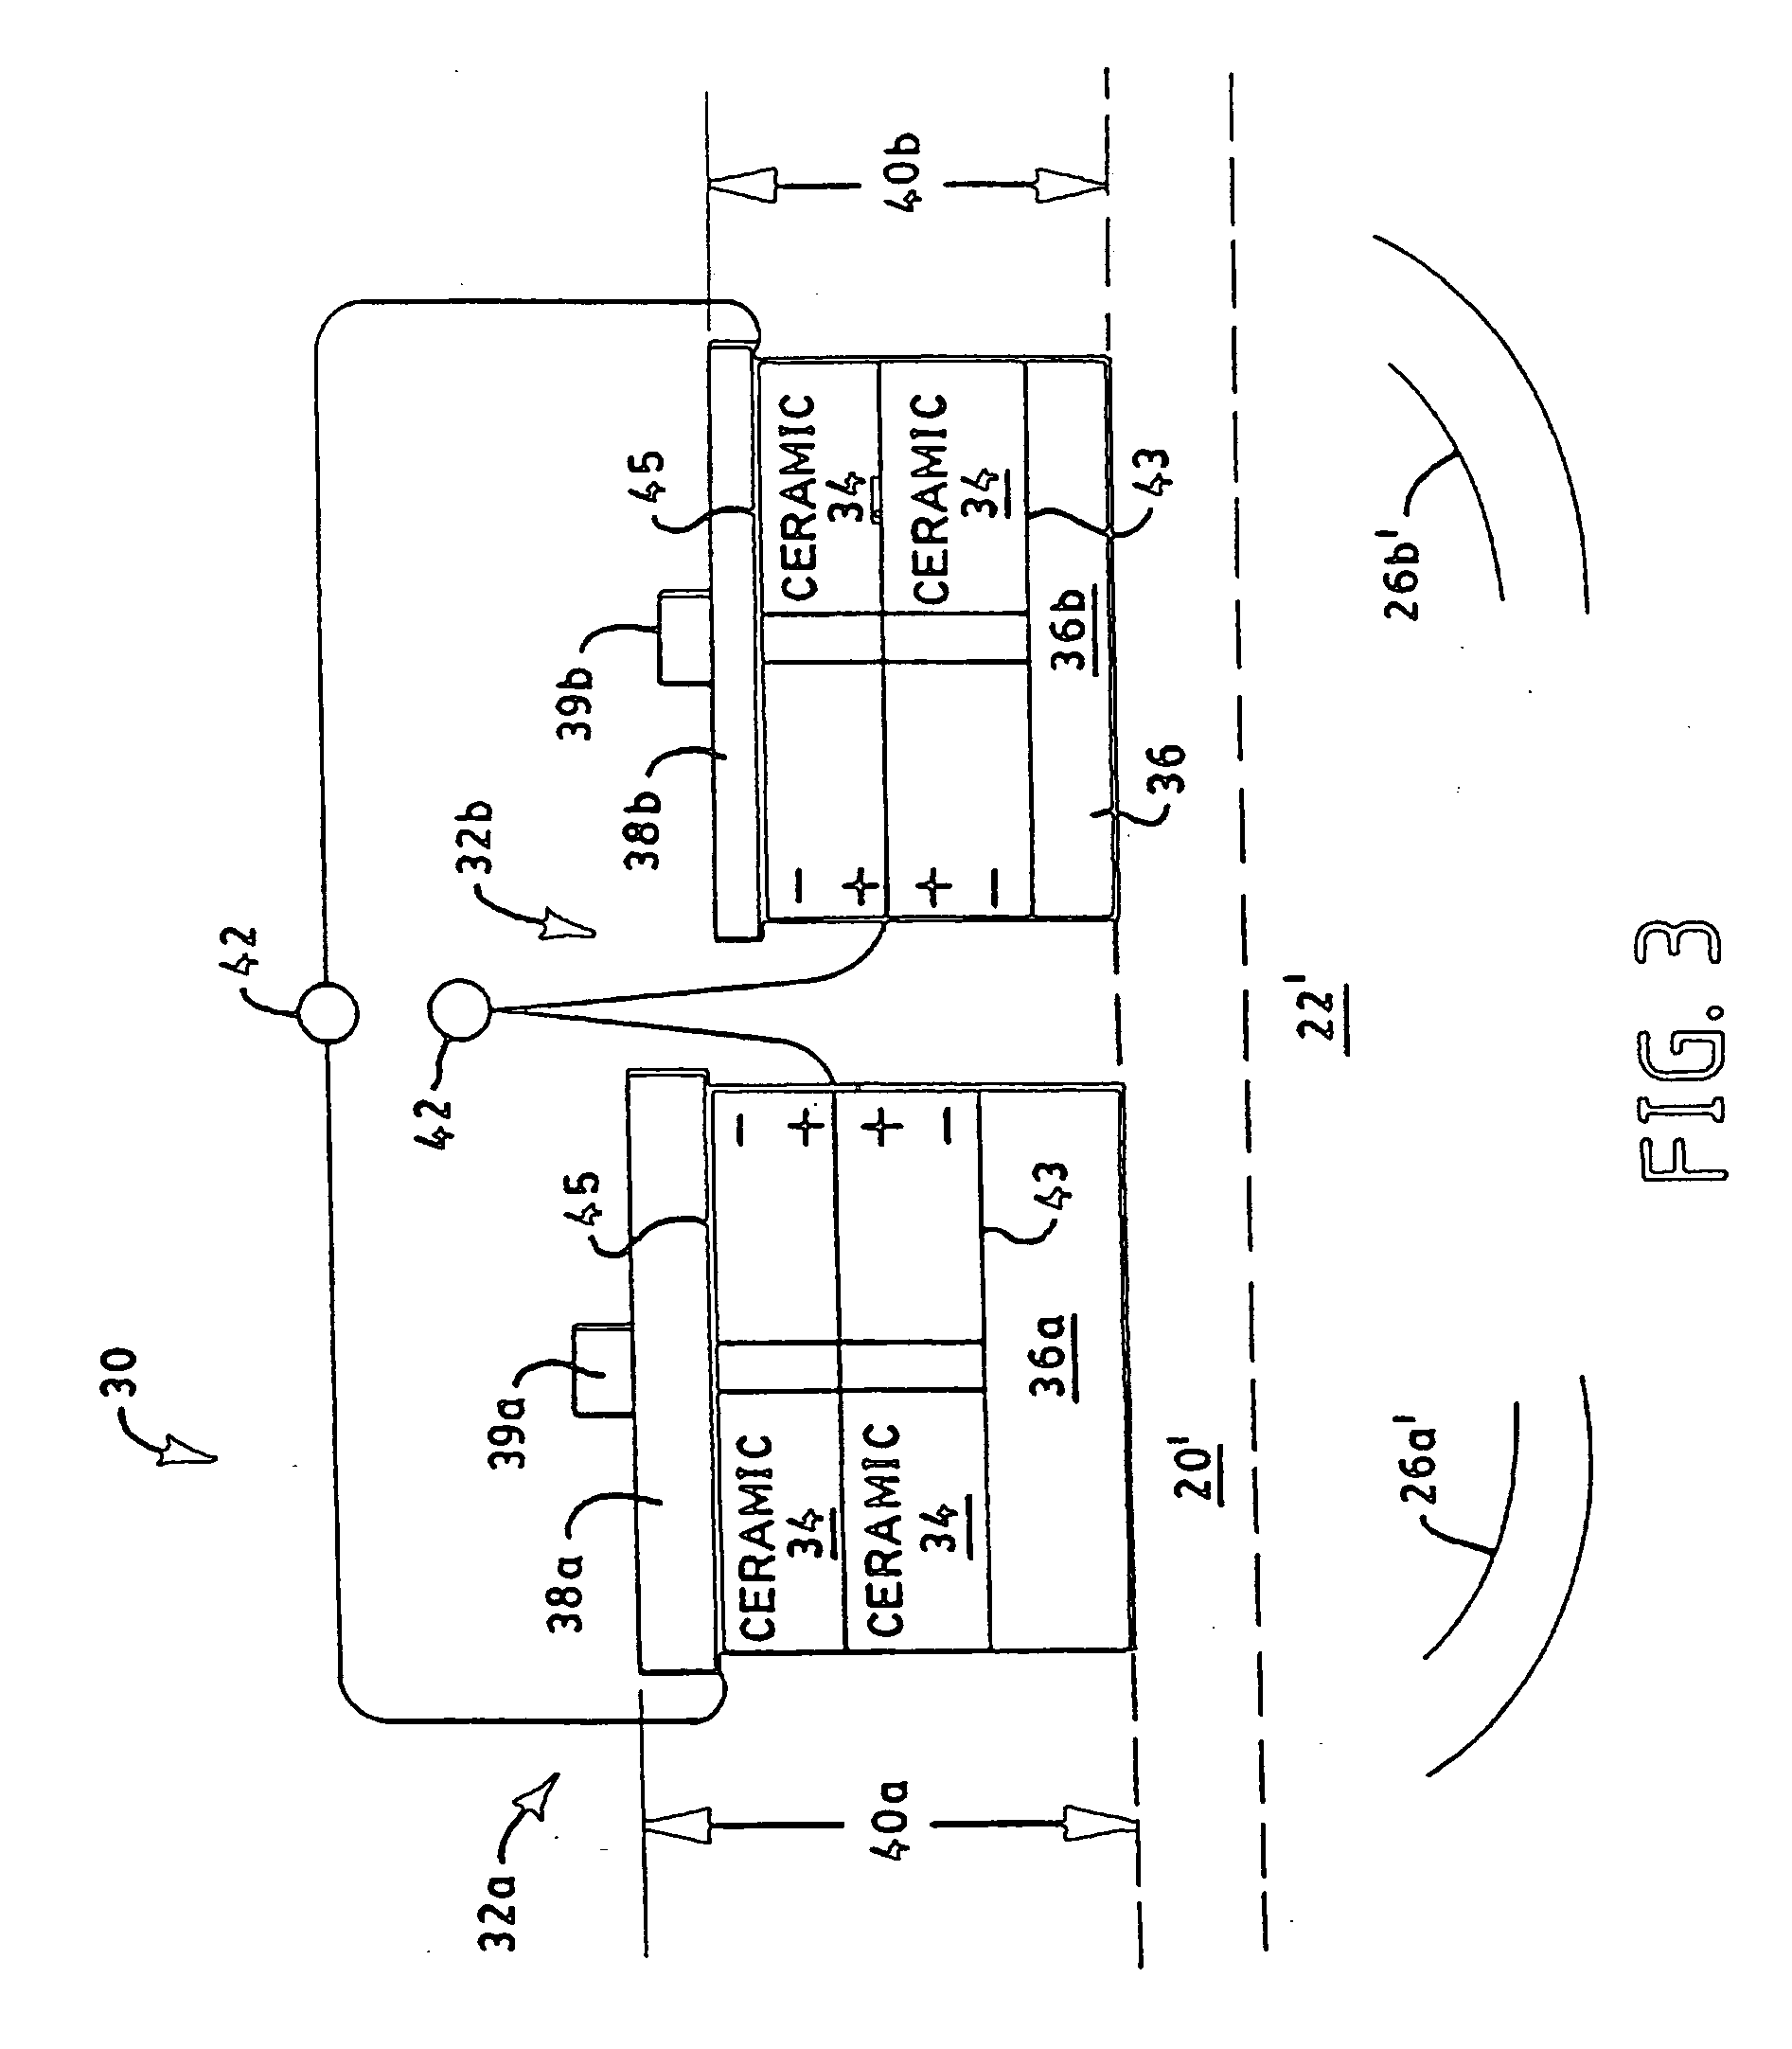 Apparatus, circuitry, signals and methods for cleaning and processing with sound